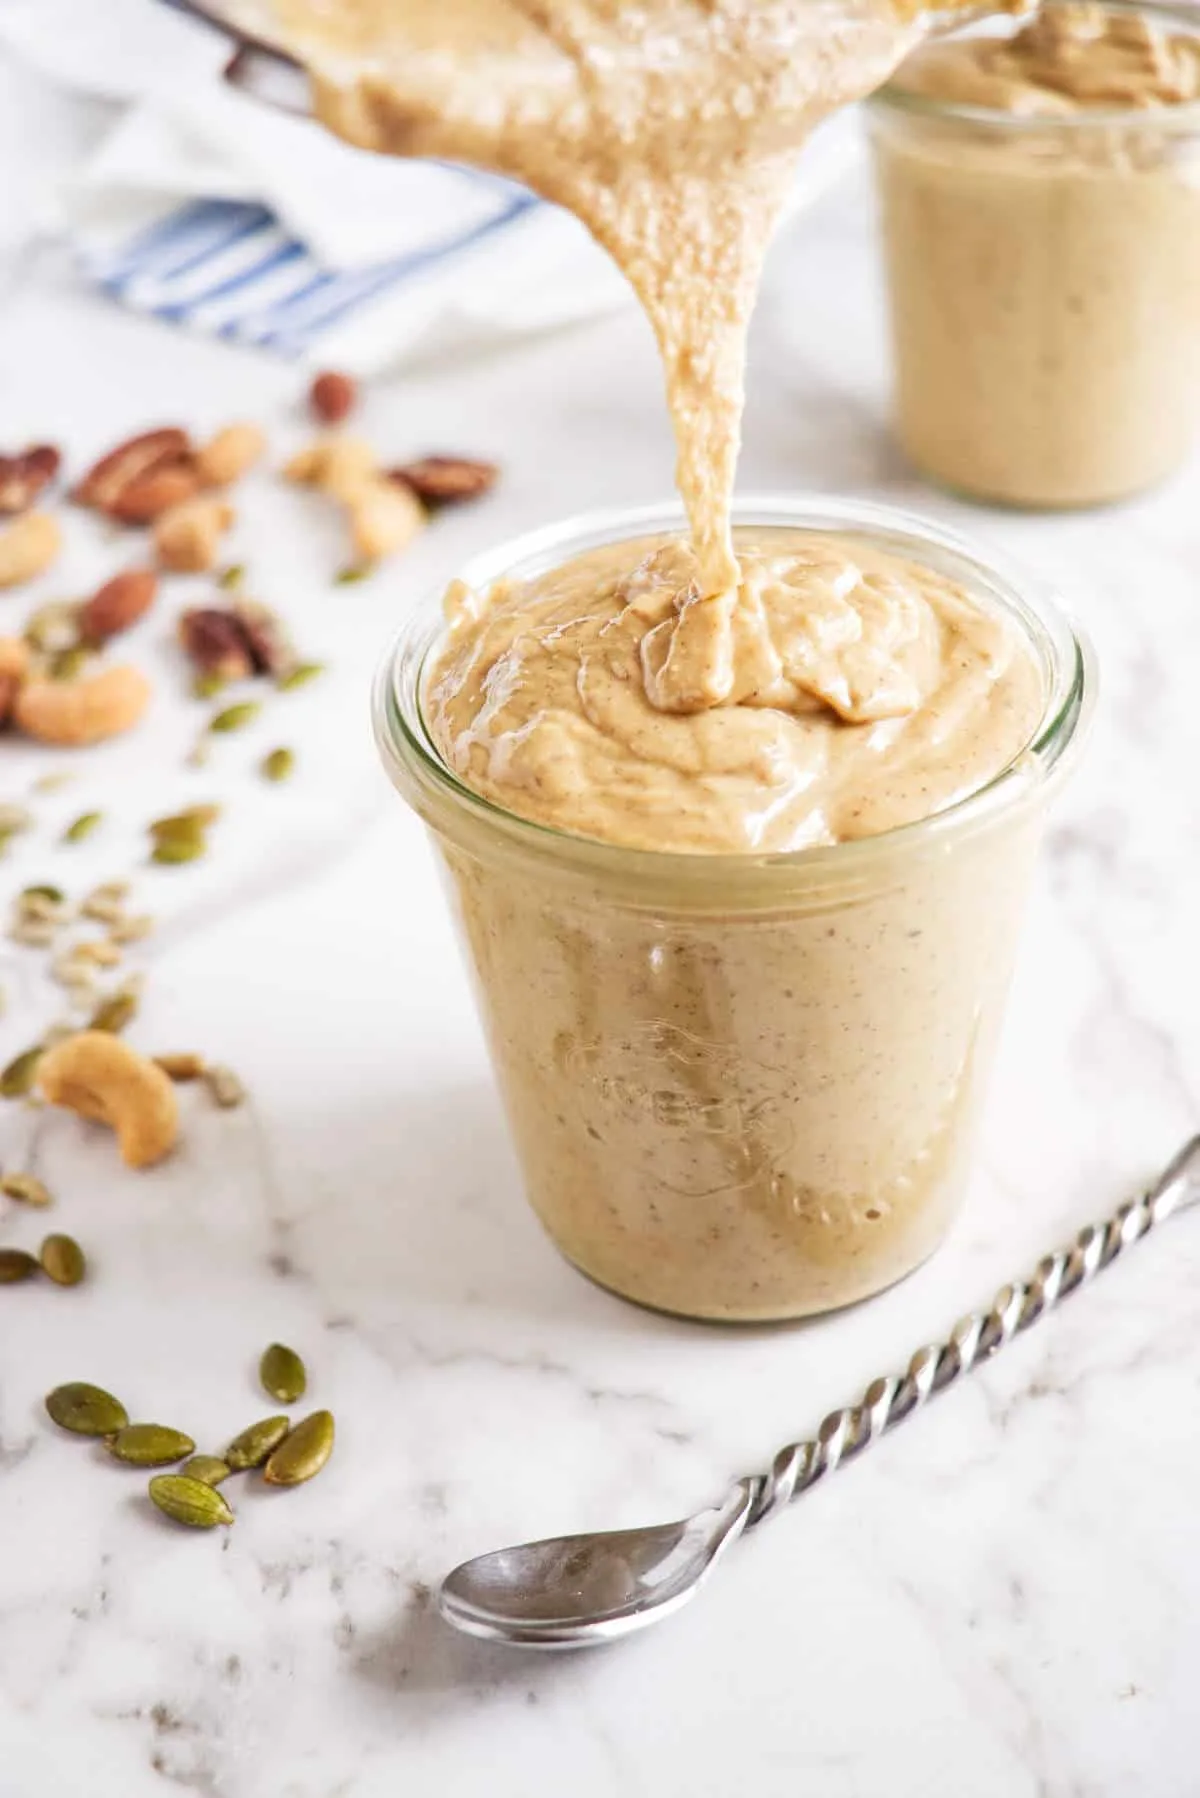 roasted seed and nut butter